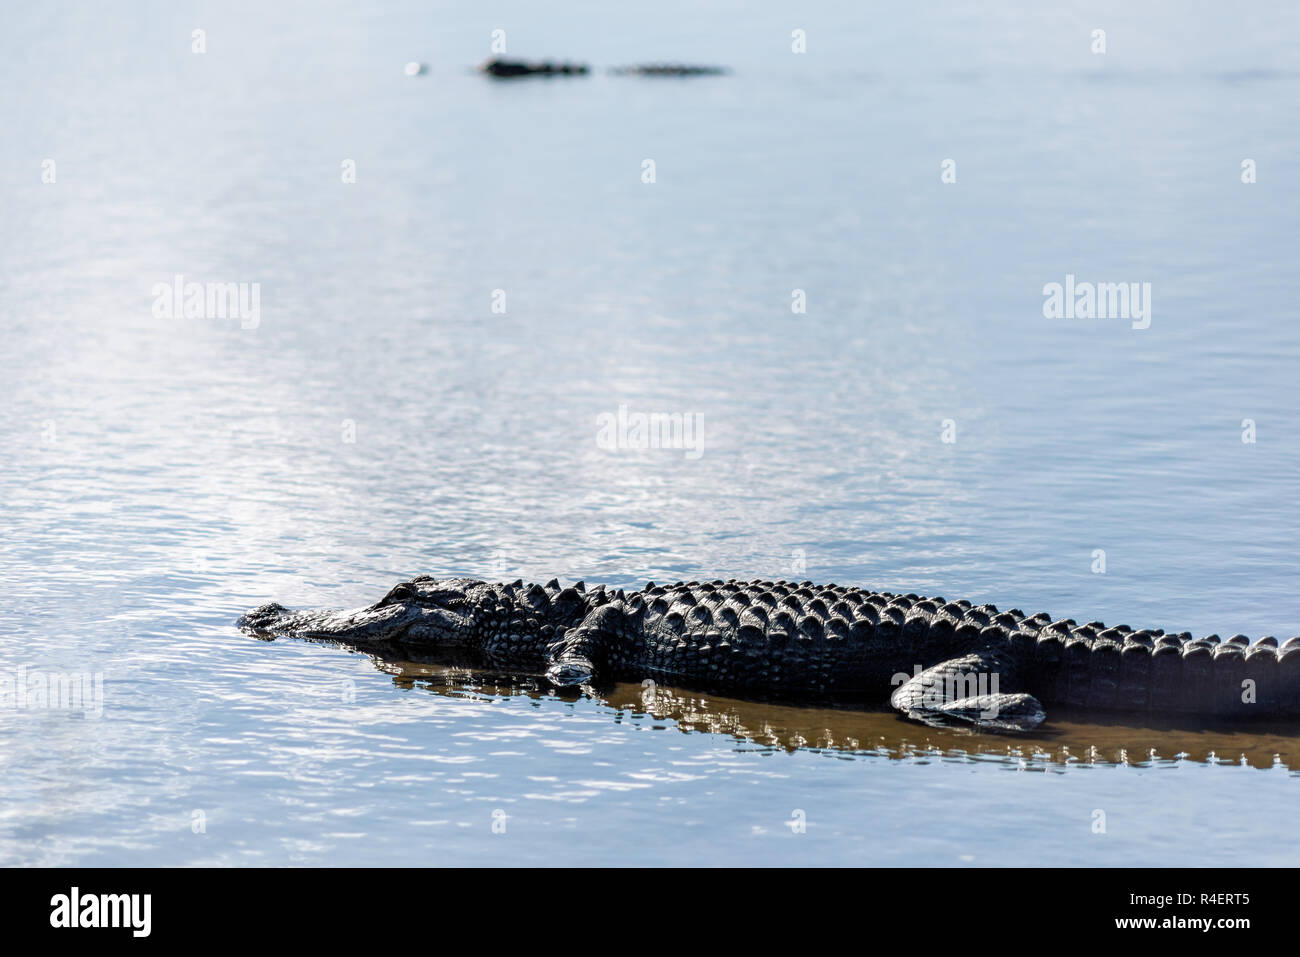 One or two alligators in deep hole famous alligator lake pond in Myakka River State Park, Sarasota, Florida, closeup lying swimming in water Stock Photo